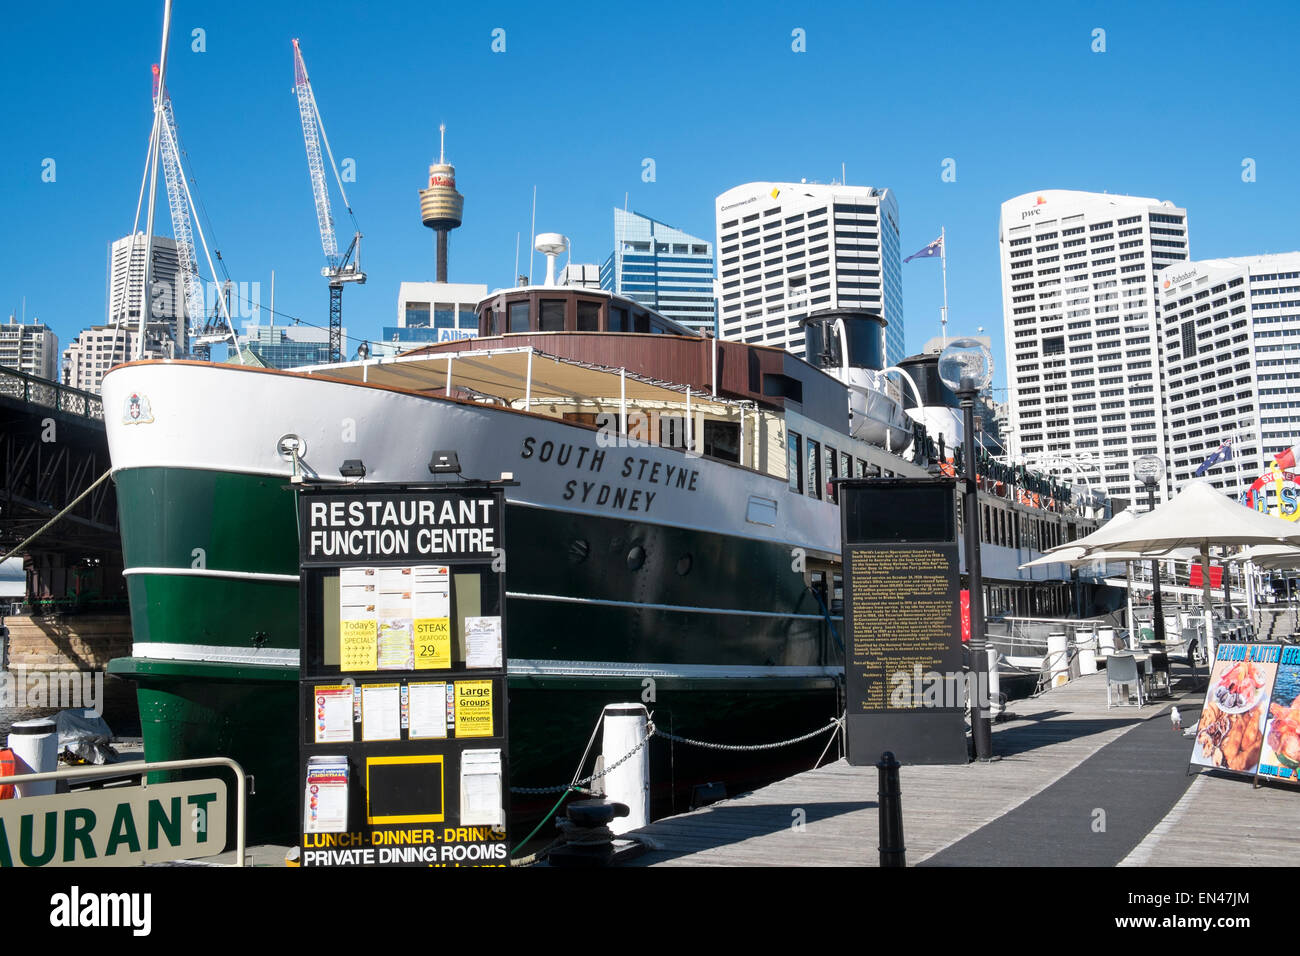 The former south steyne manly ferry built in 1938 now operating as a restaurant in Darling Harbour,Sydney Stock Photo